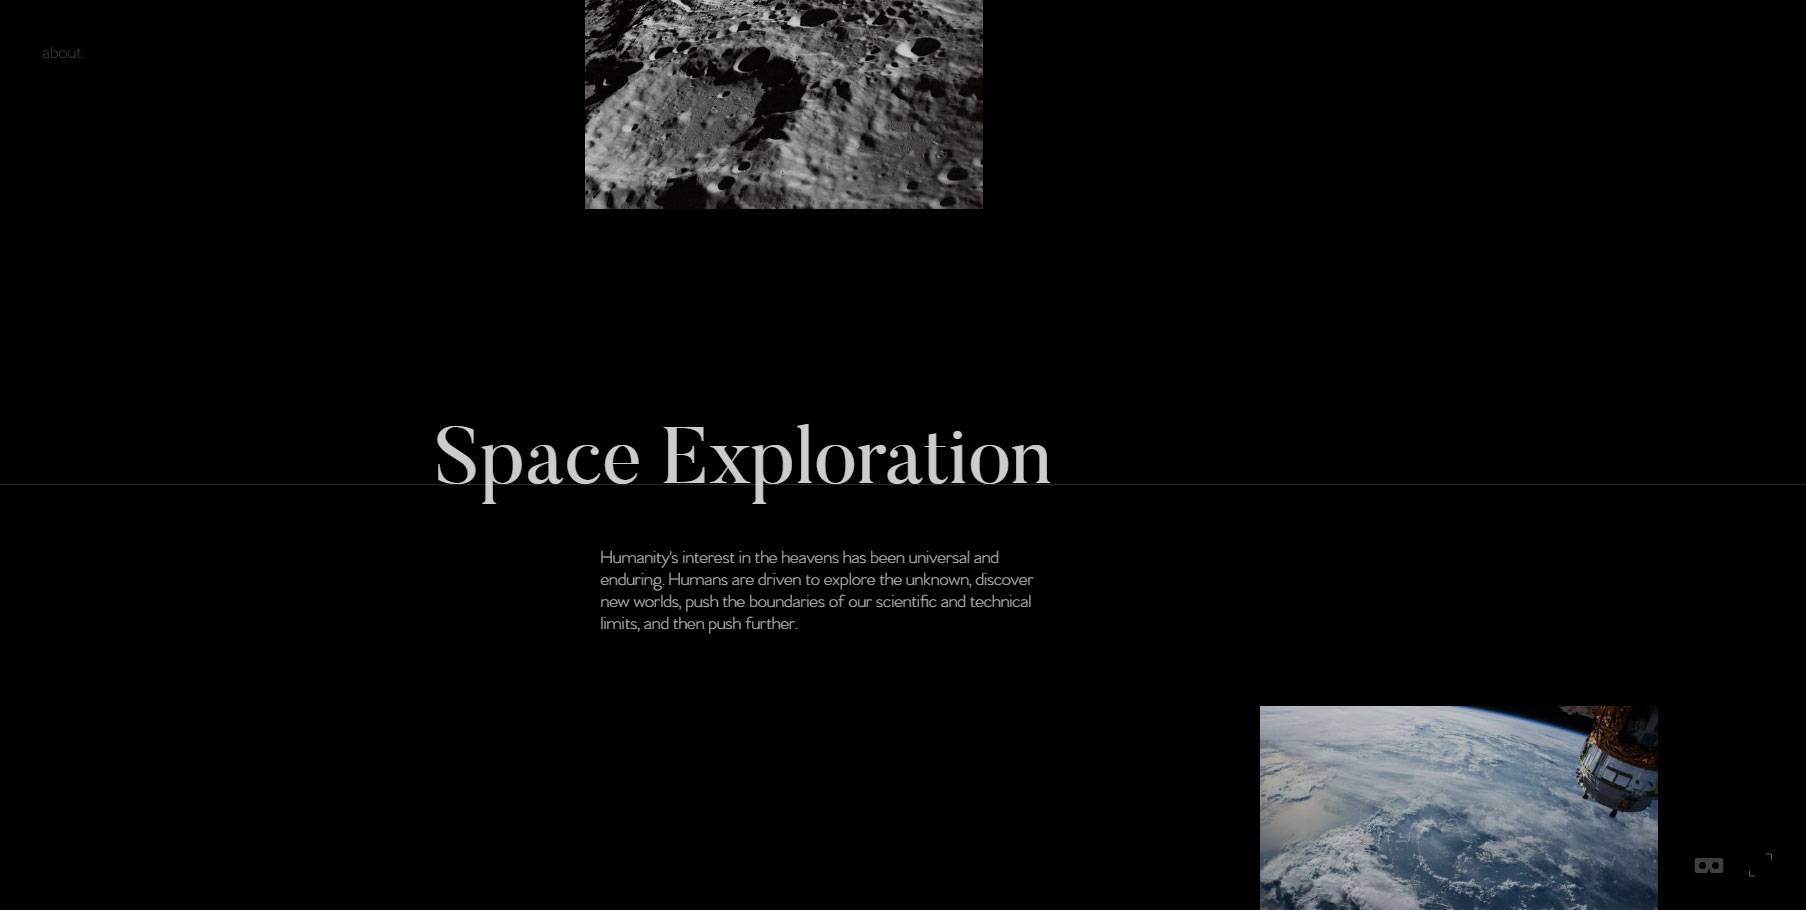 Space.io - Why we explore - Website of the Day